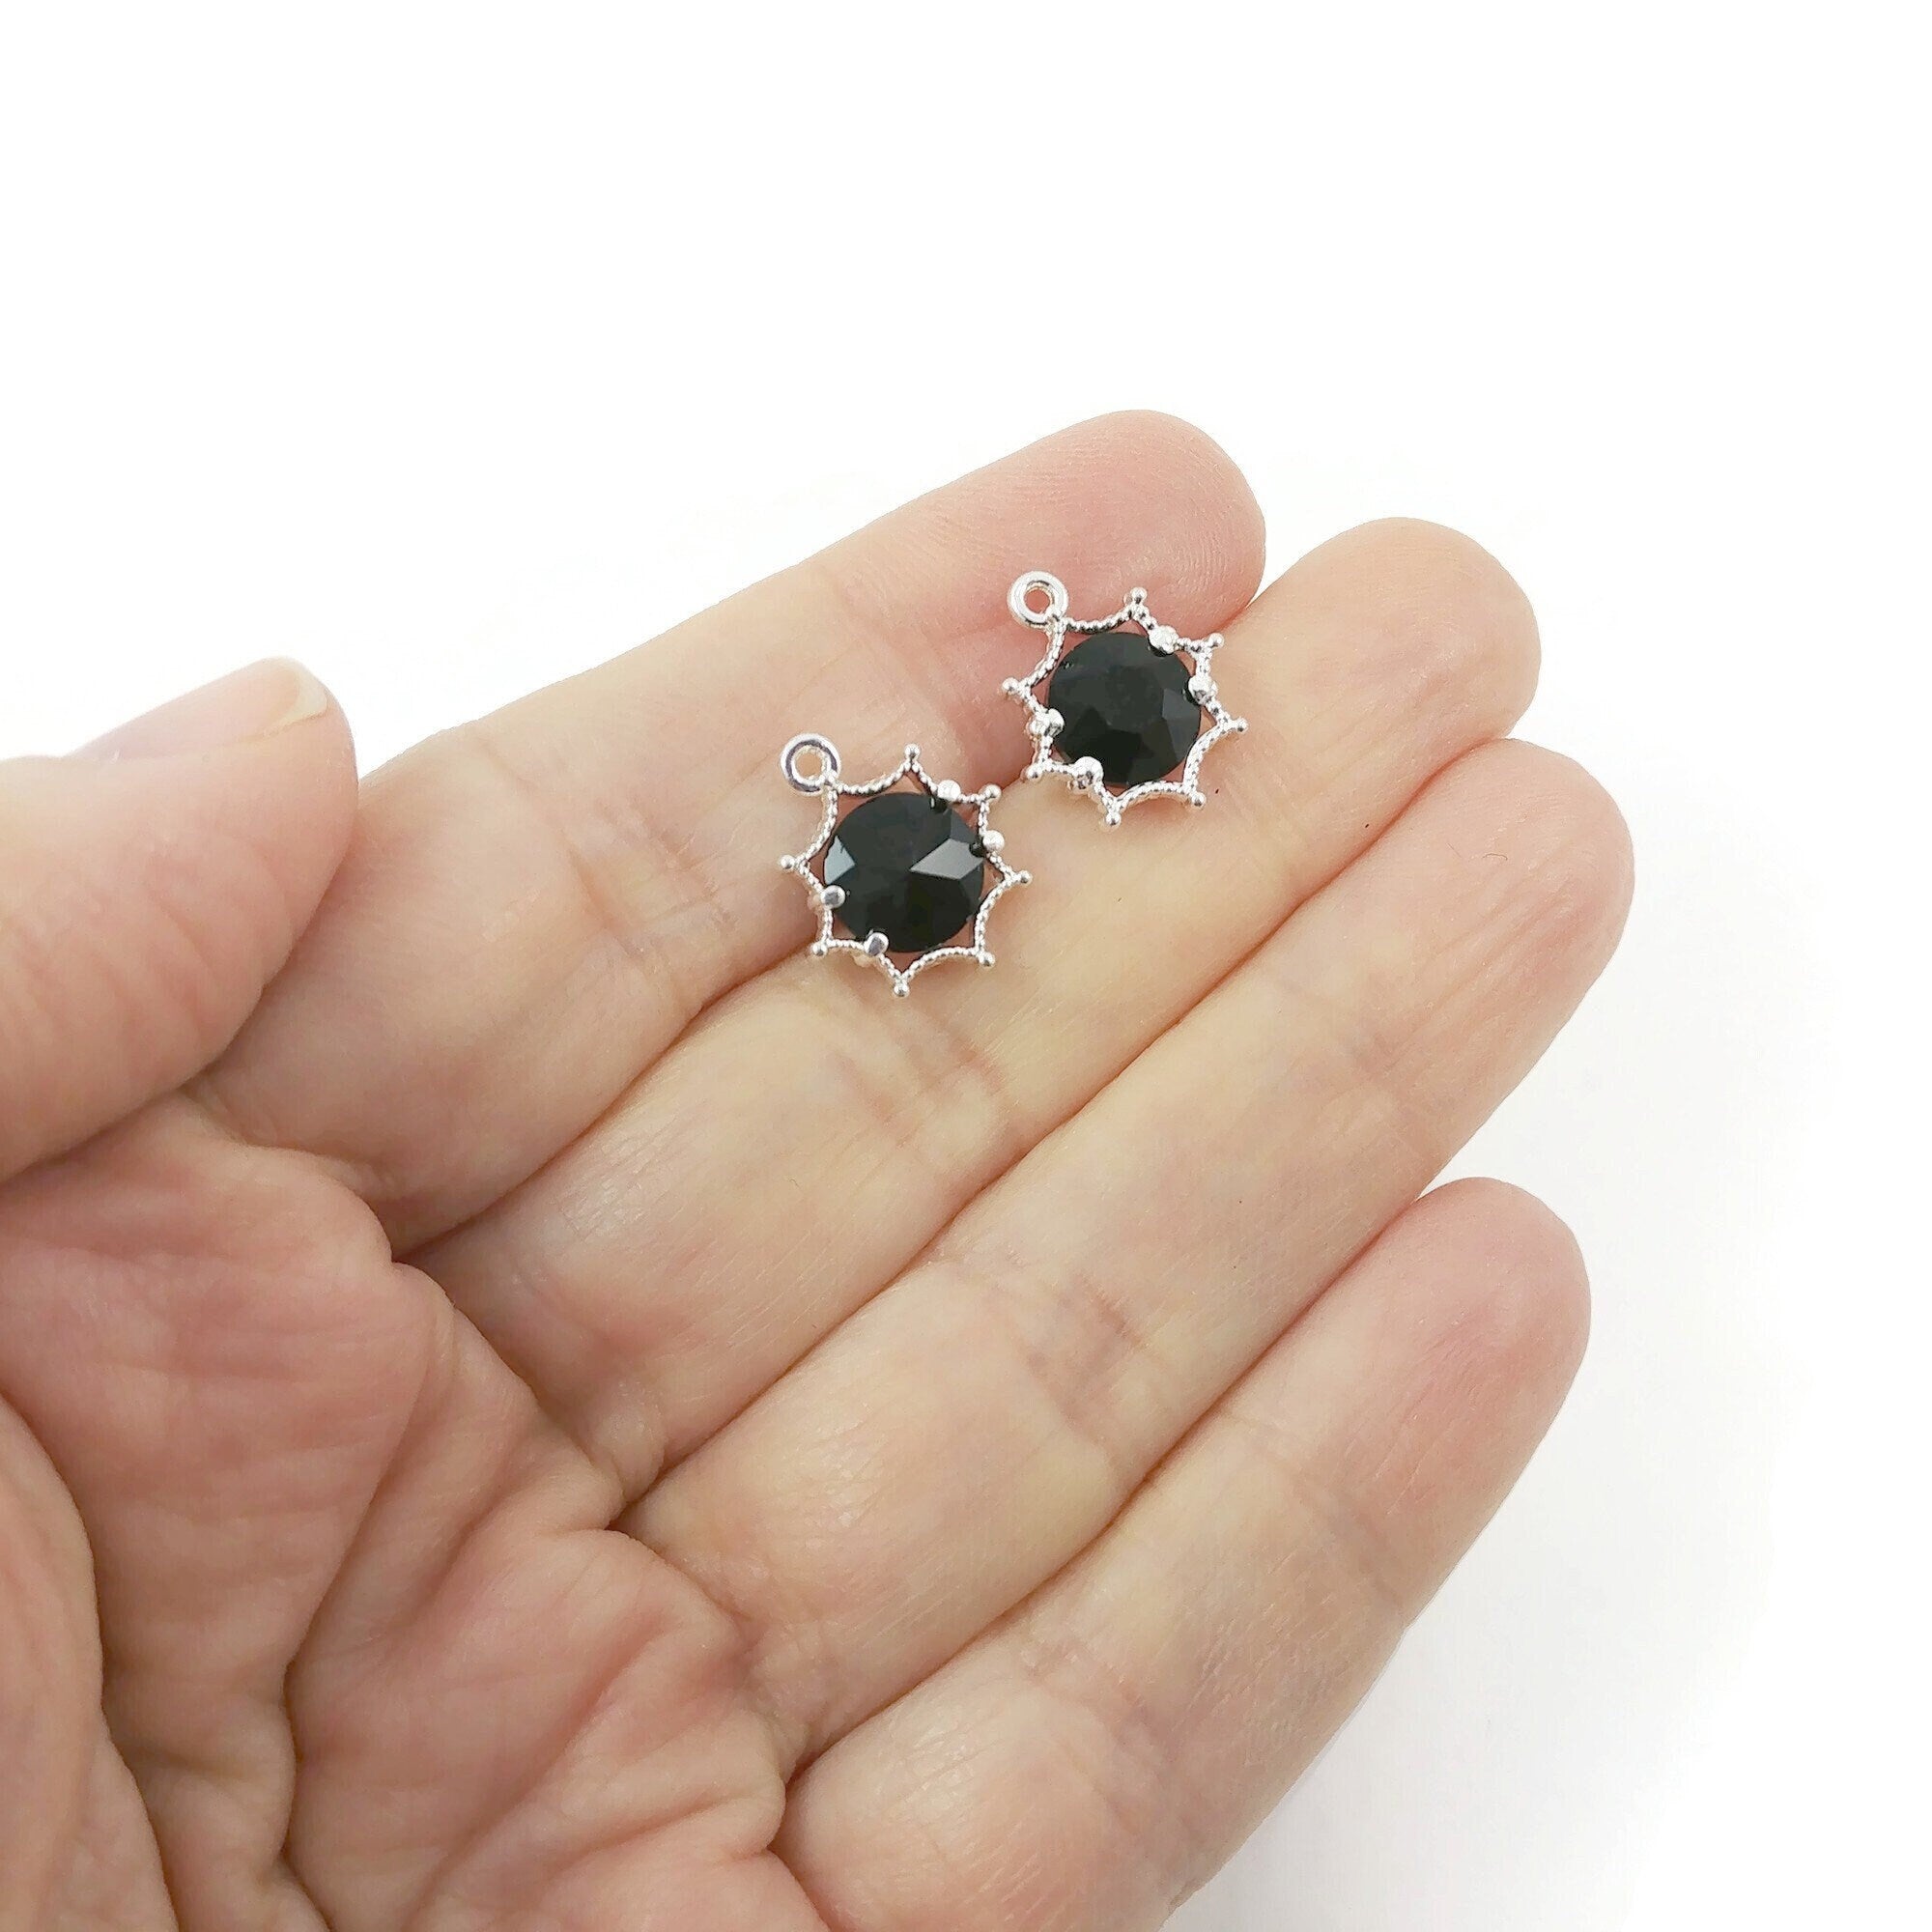 Tiny black crystal charms, 15mm nickel free metal pendants, Charms for jewelry making